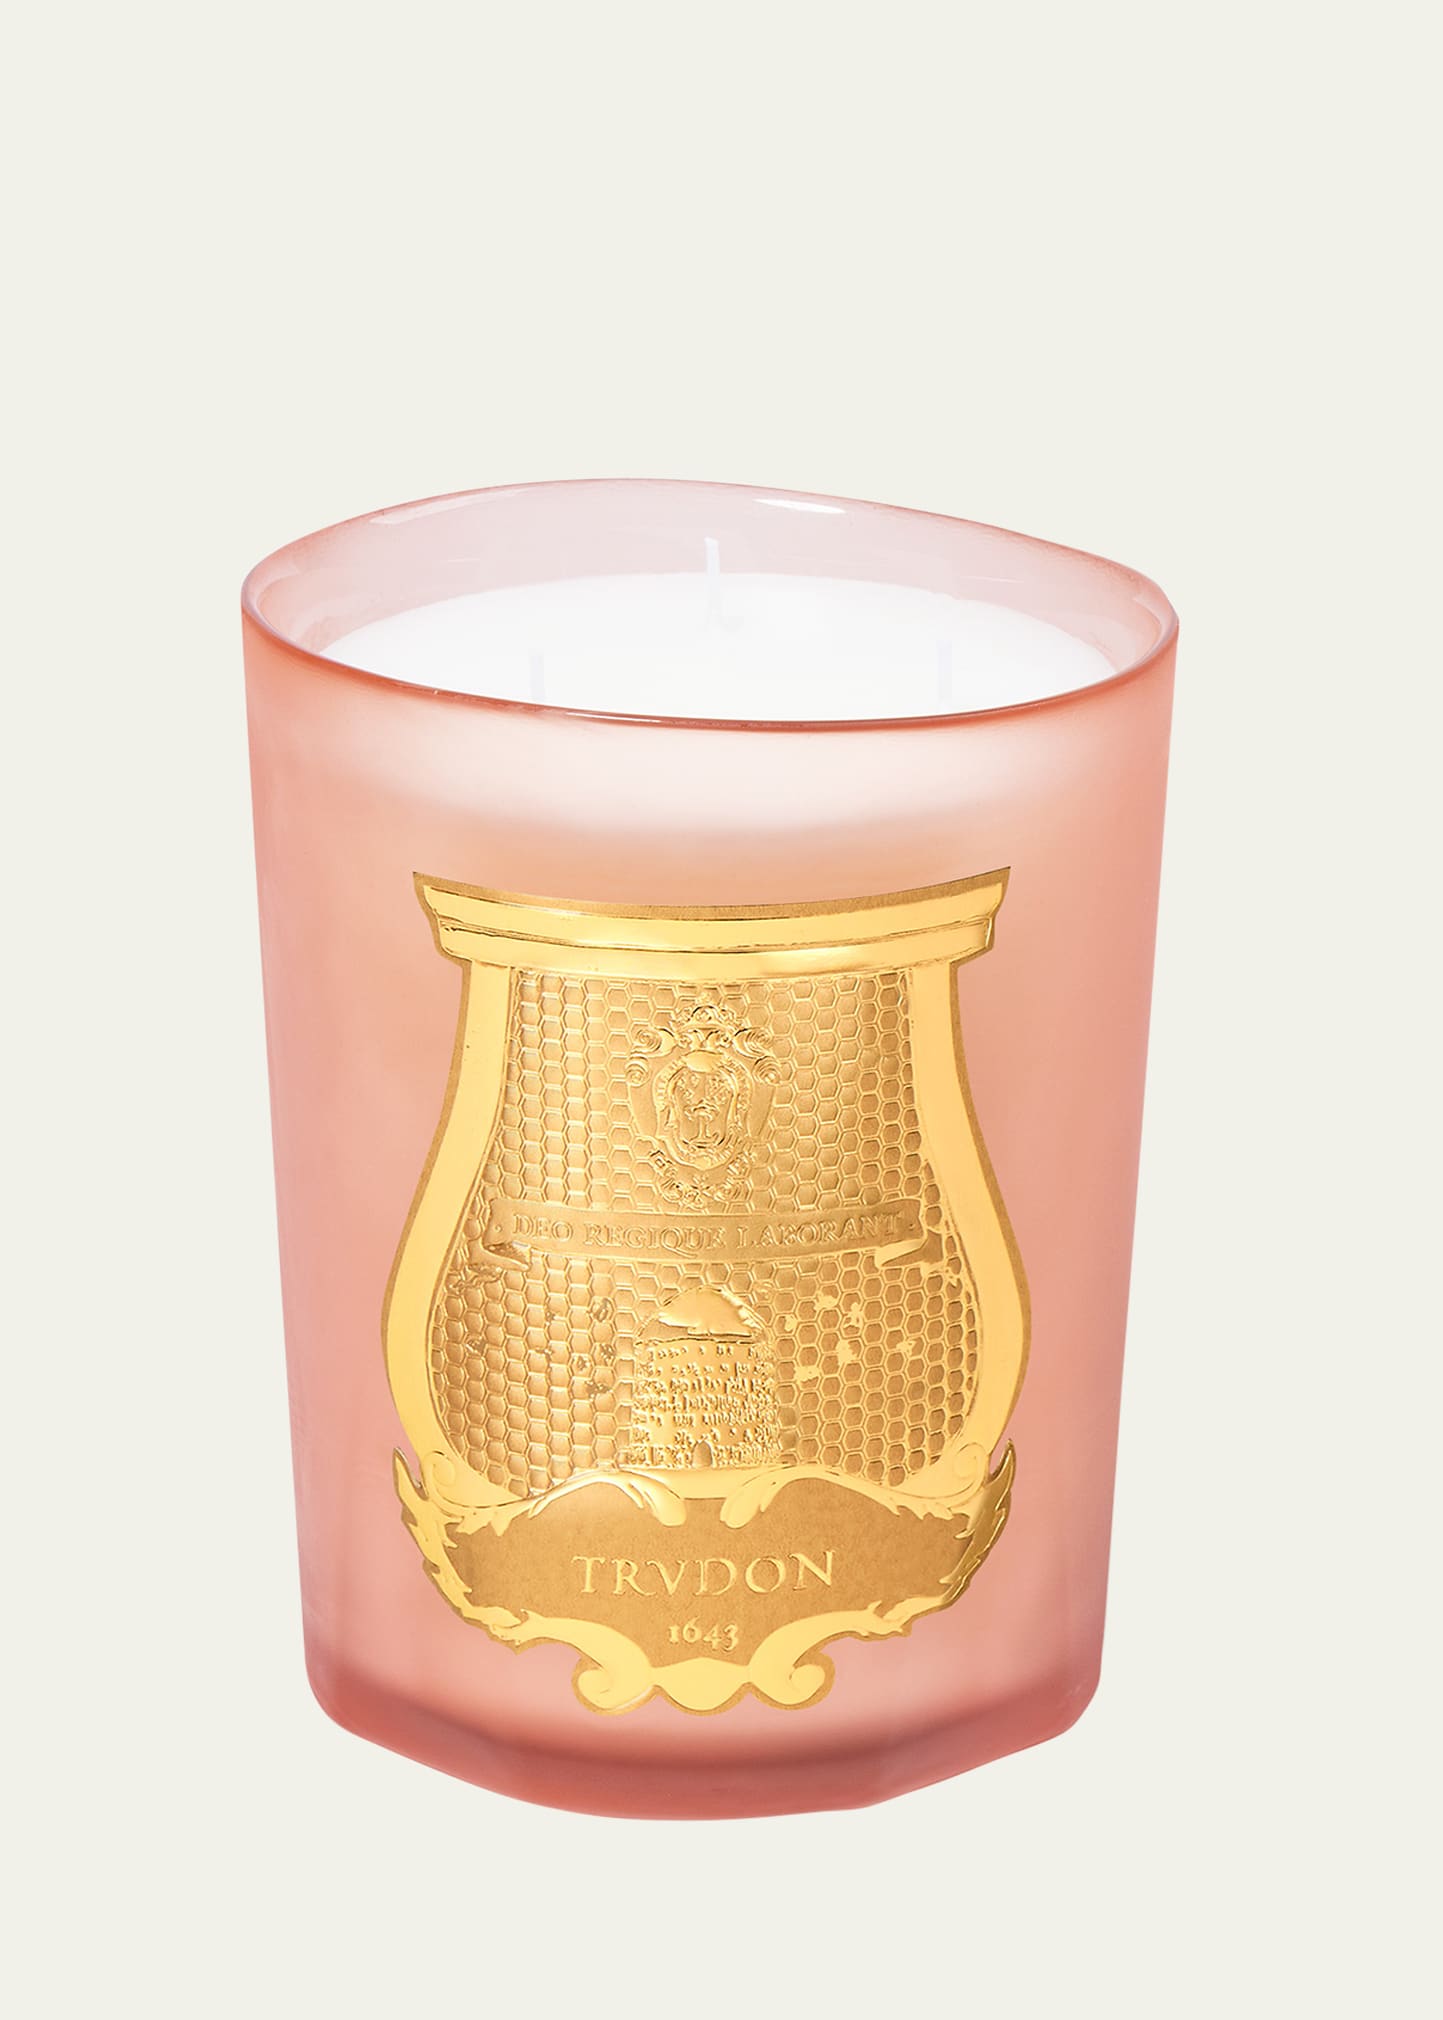 Trudon Tuileries Floral Chypre Classic Candle